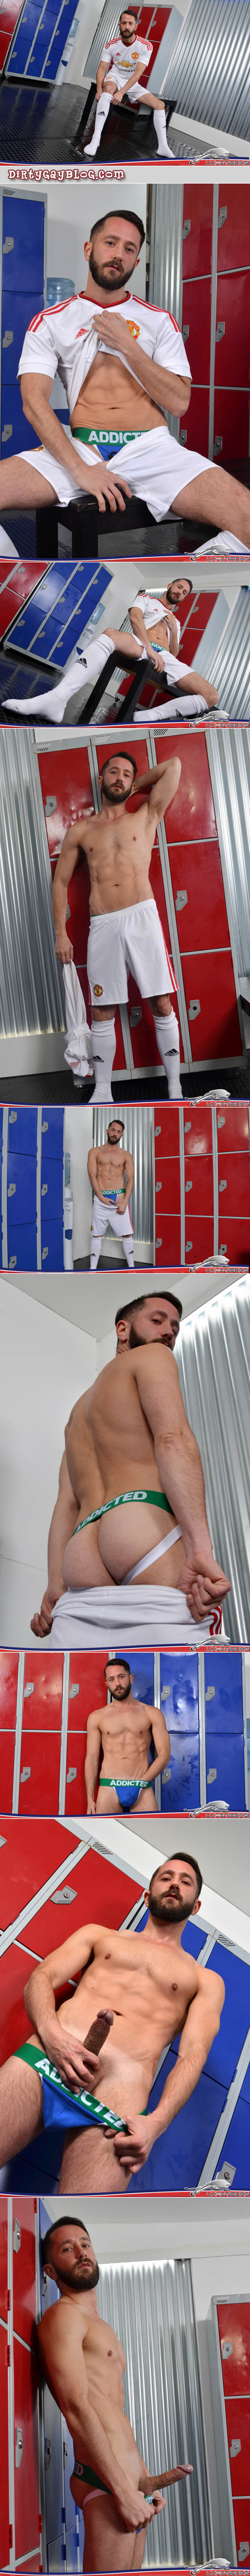 Bearded athlete stripping in the locker room with a hard-on.